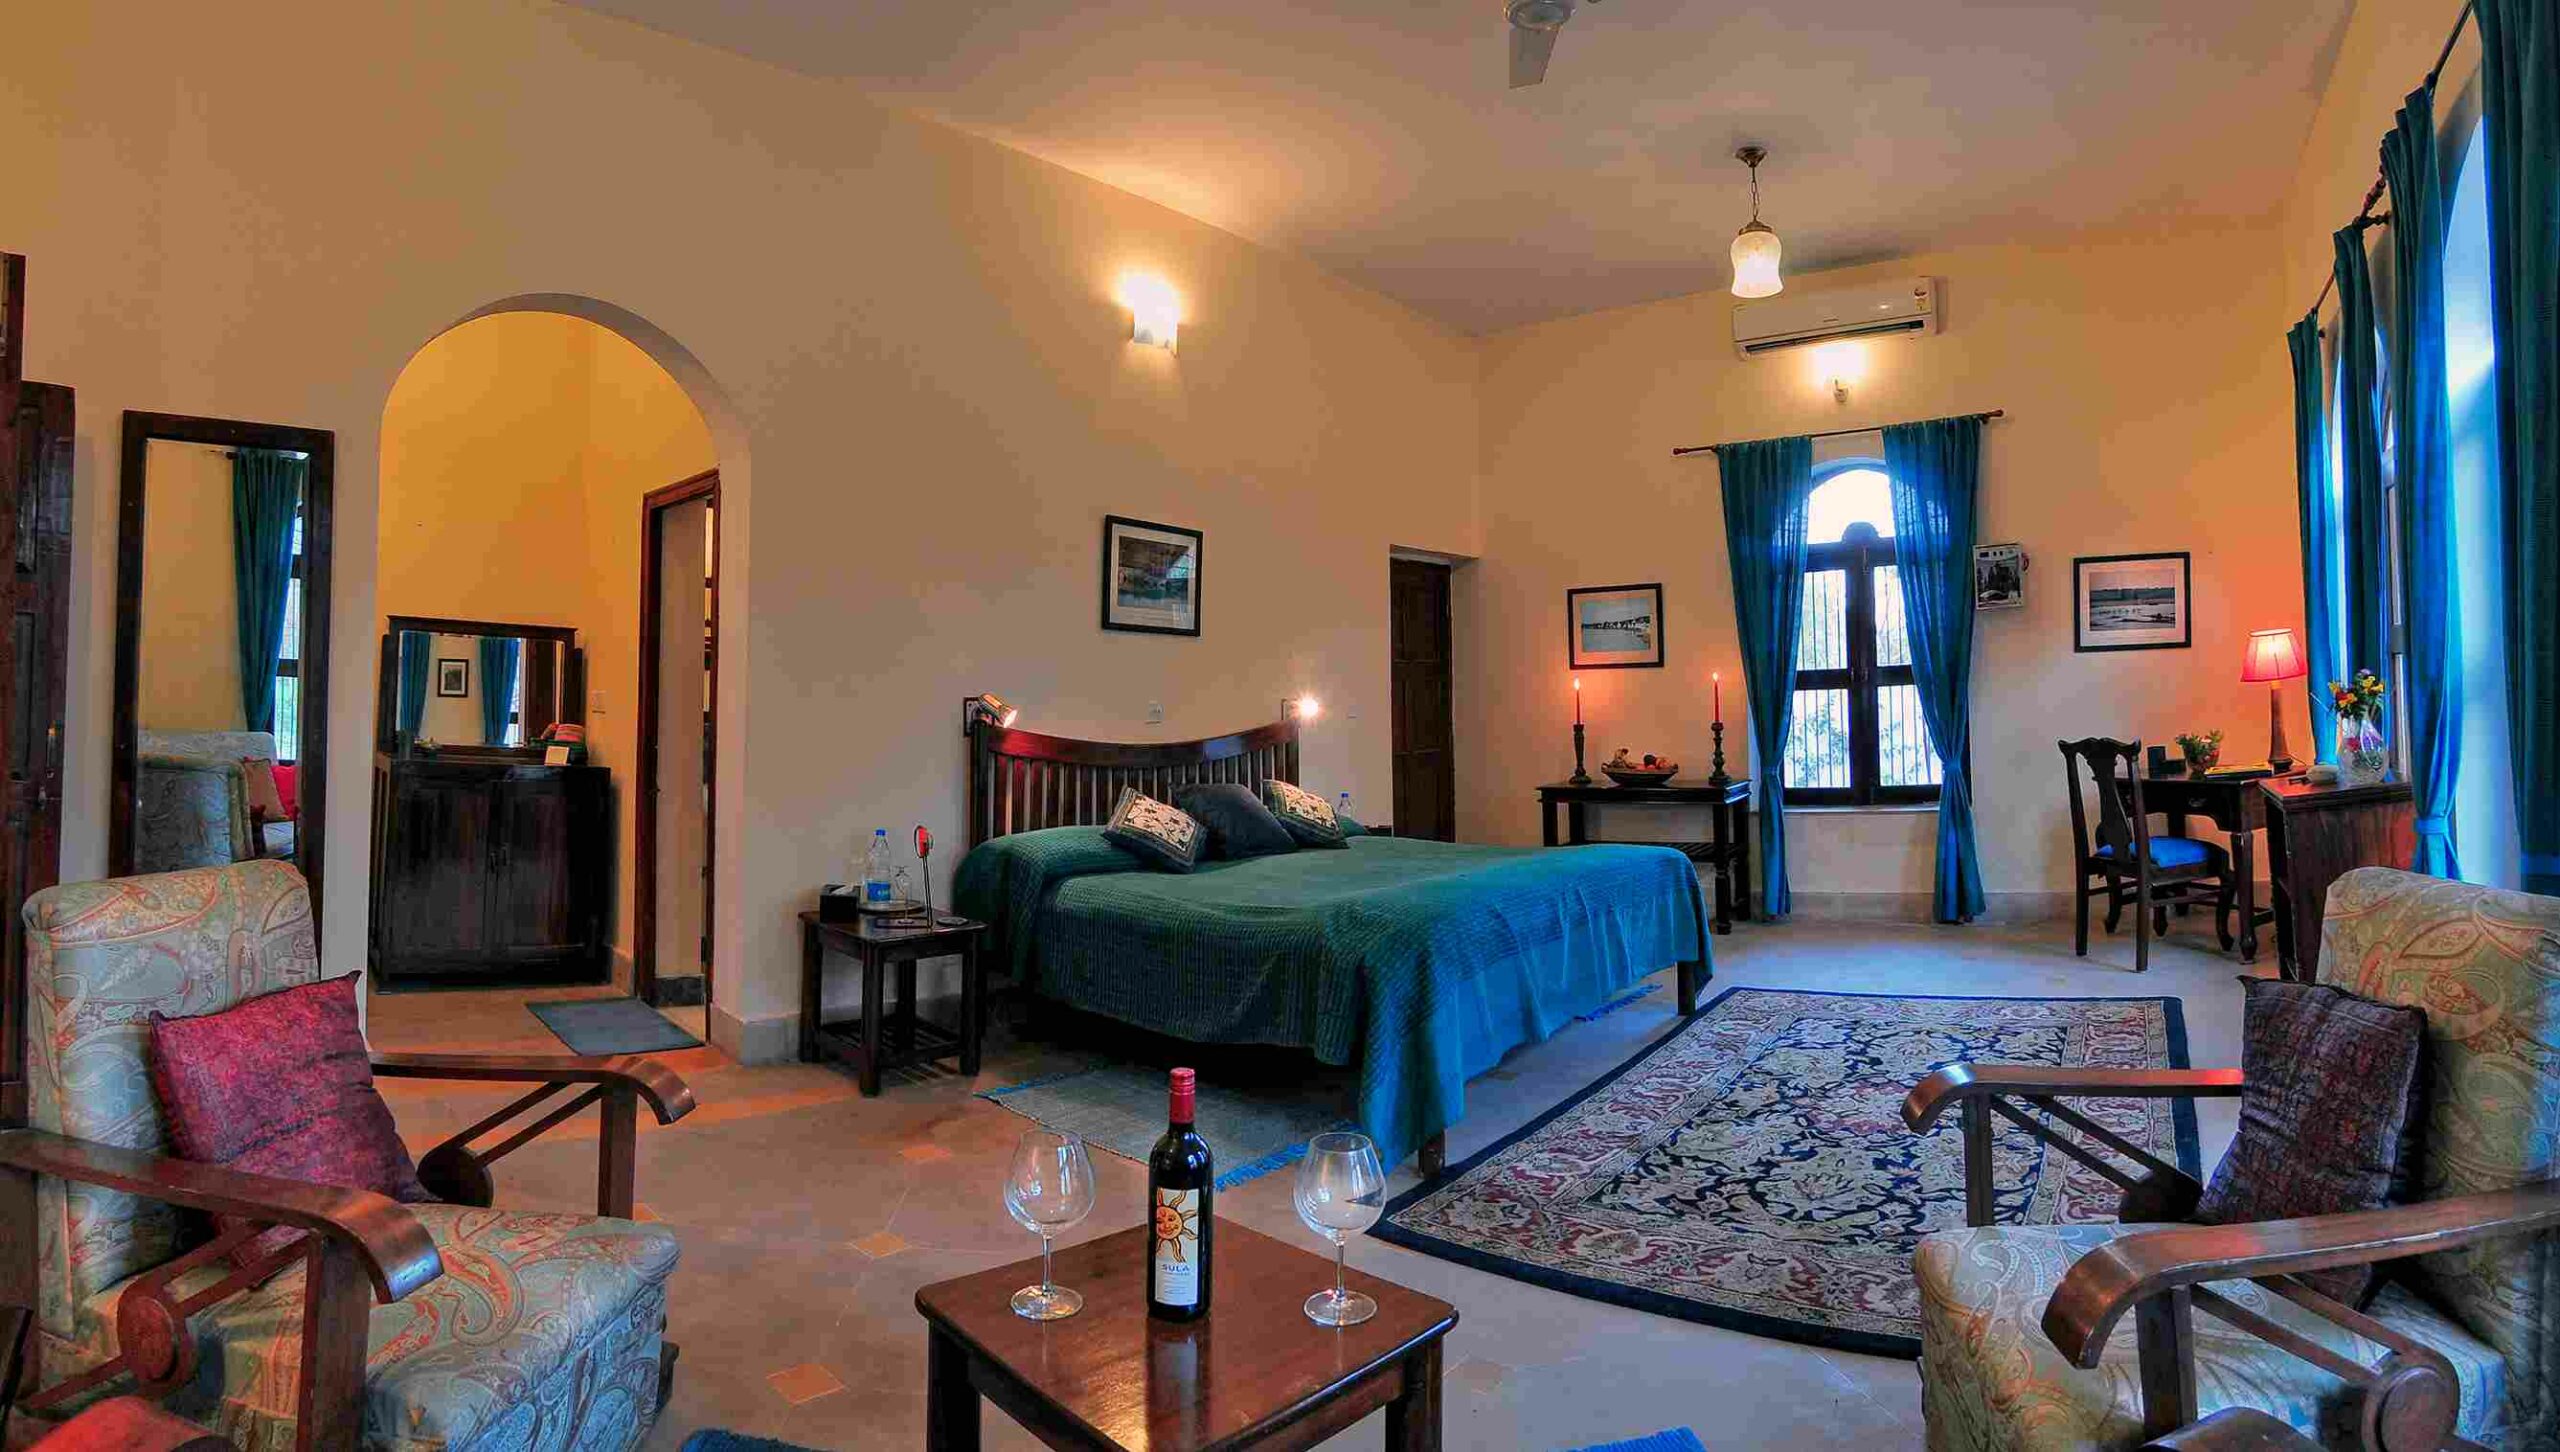 The cottages are equipped with all modern facilities and there are numerous outdoor activities for guests to enjoy